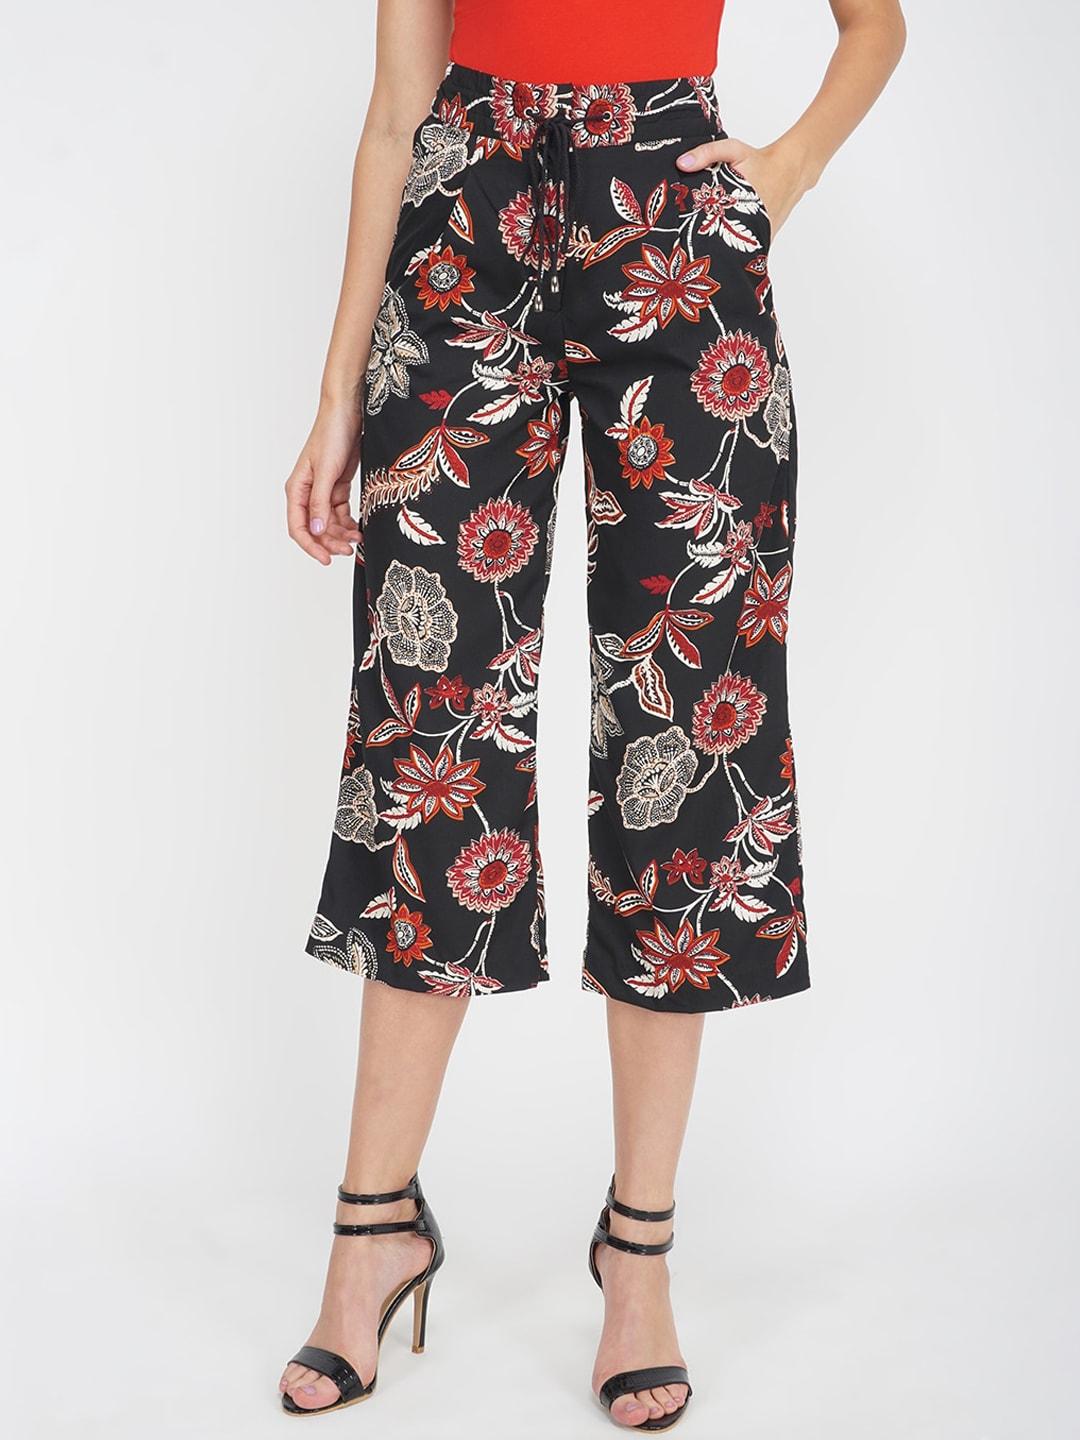 Oxolloxo Women Black Floral Printed High-Rise Culottes Trousers